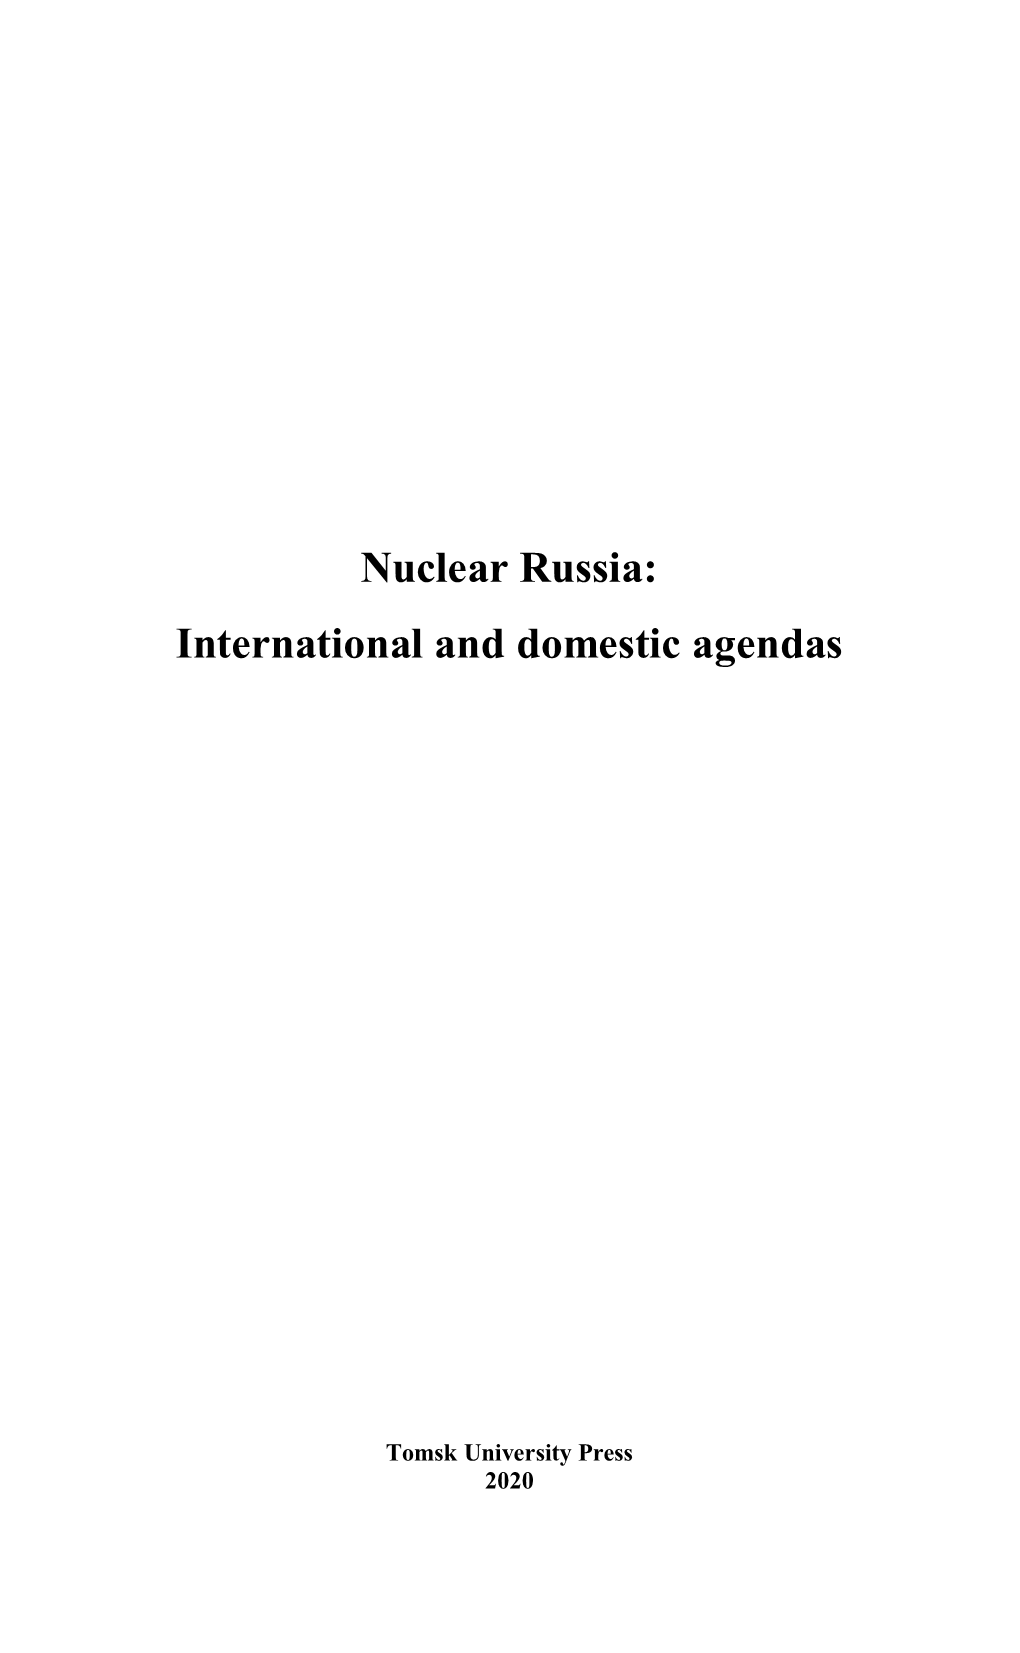 Nuclear Russia. International and Domestic Agendas